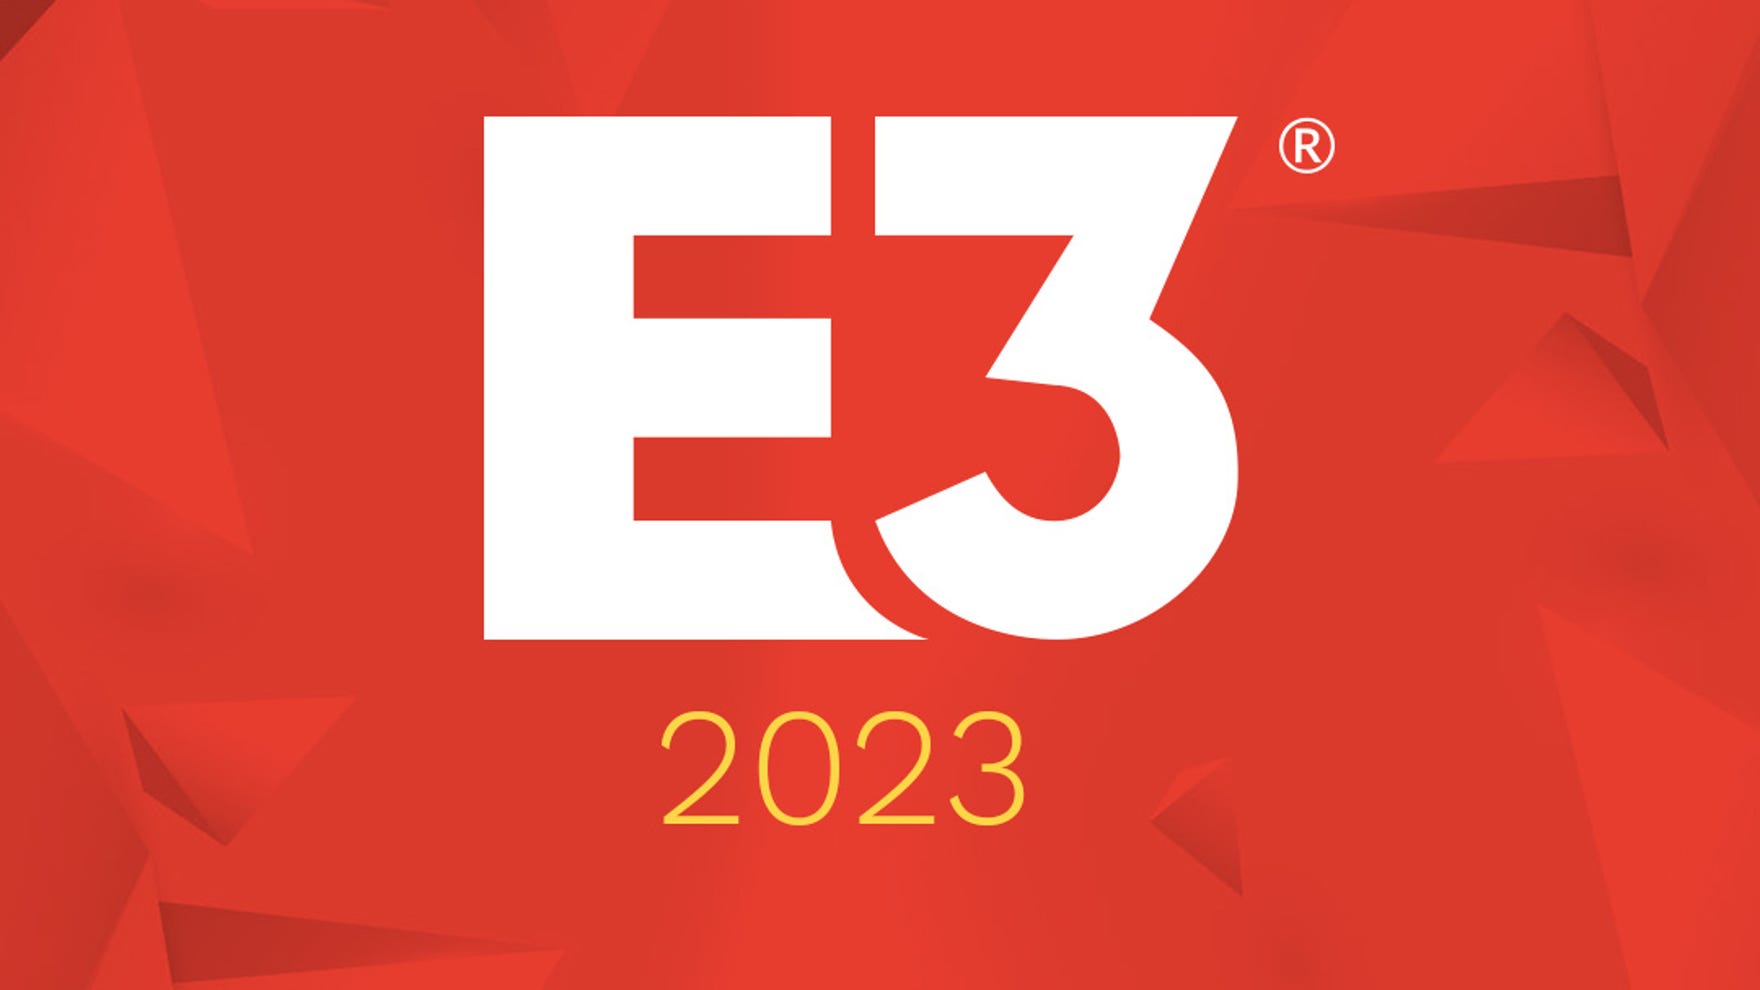 E3 2024 seems in doubt as ESA reportedly working on reinvention for